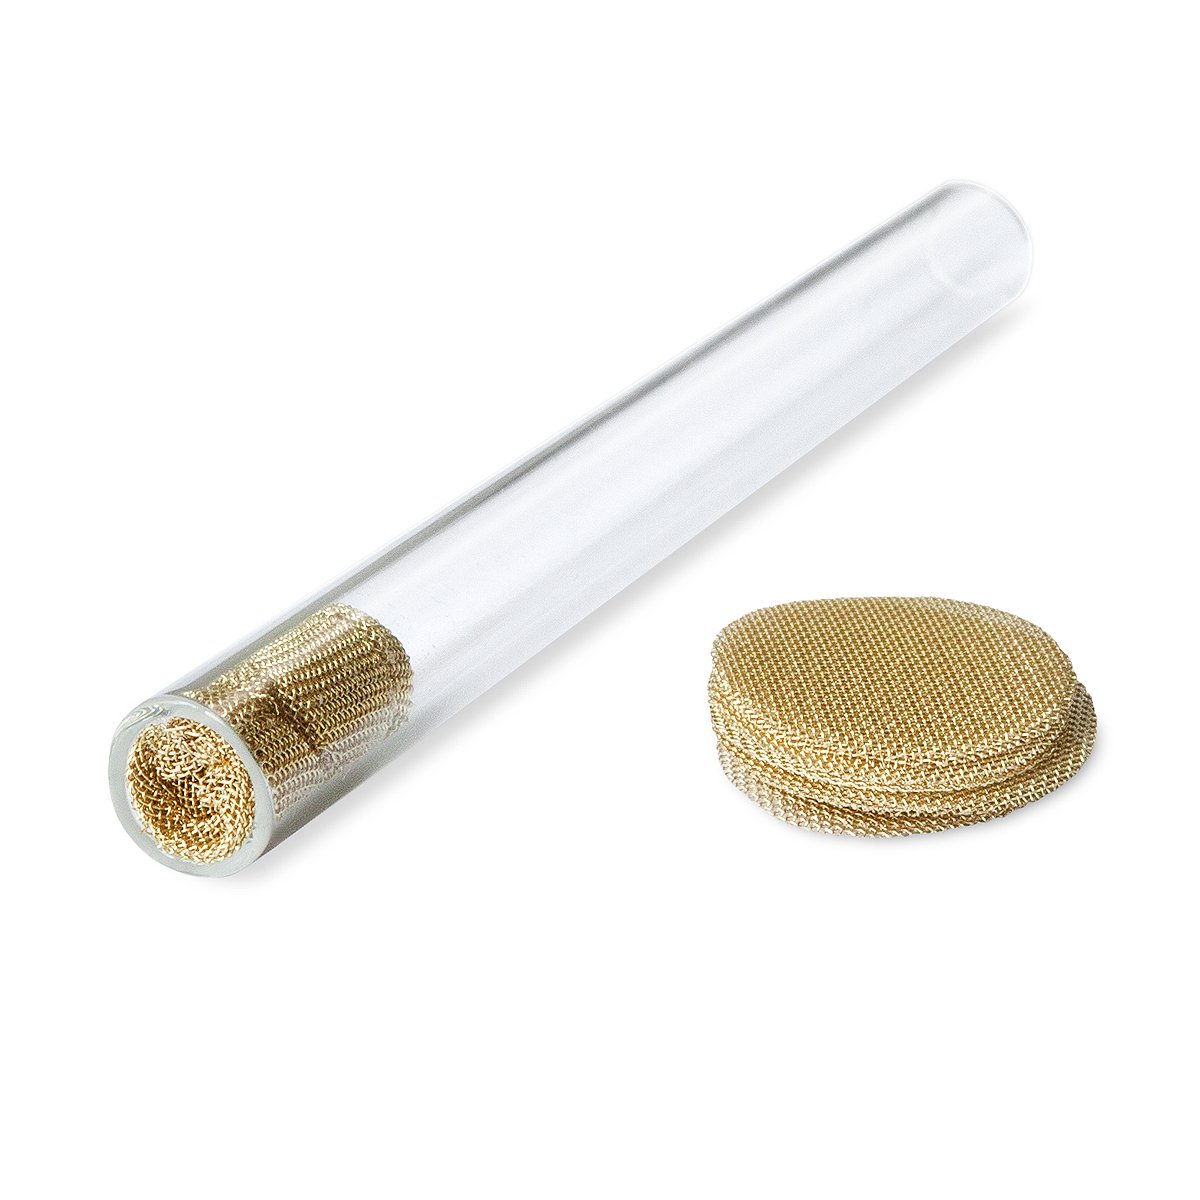 Glass Pipe with a Plastic Case (brass gauze type)